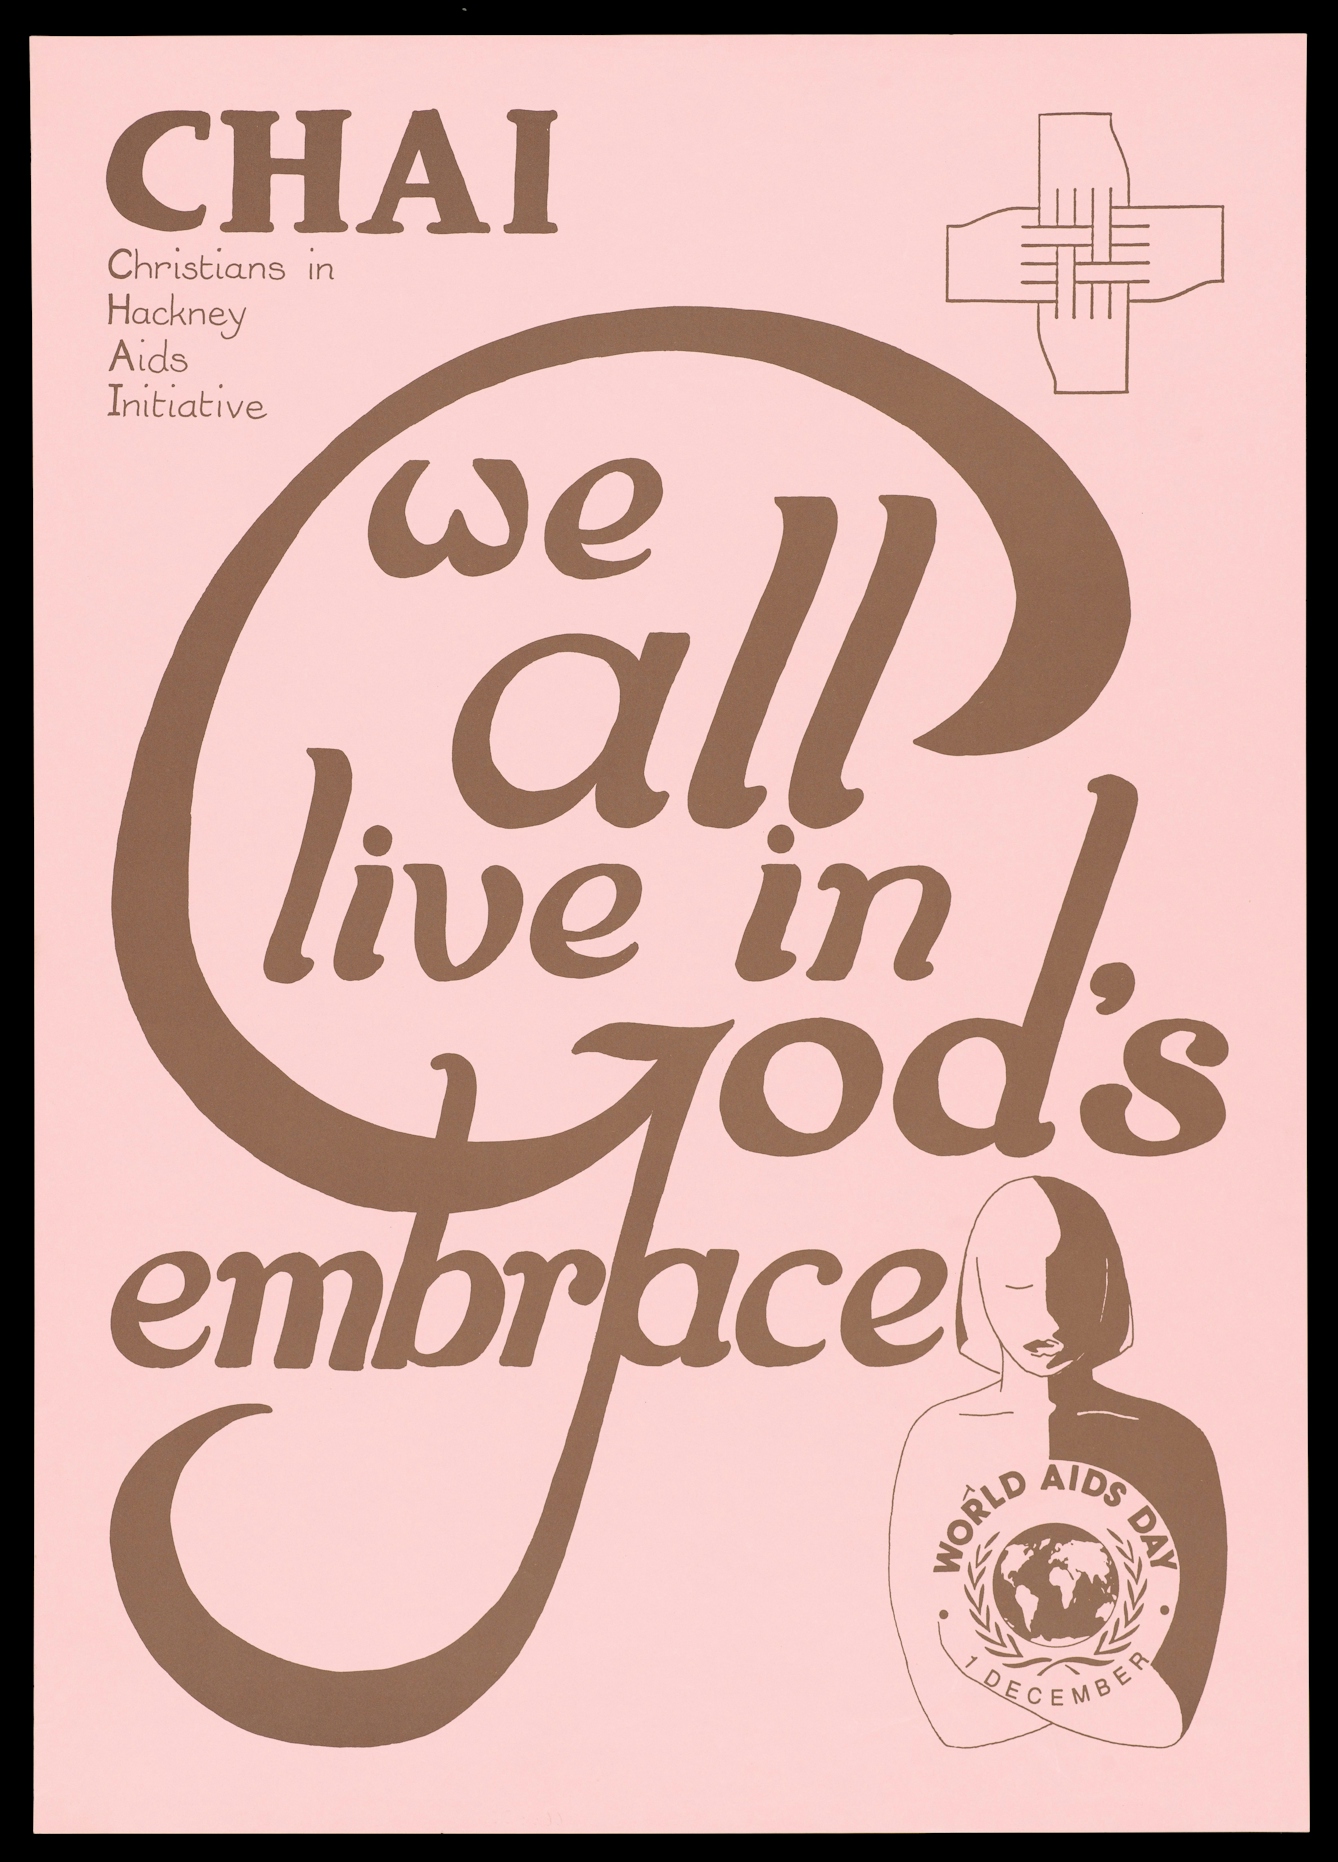 AIDS poster from CHAI -- Christians in Hackney AIDS initiative. The pink and brown poster reads 'We all live in God's embrance'